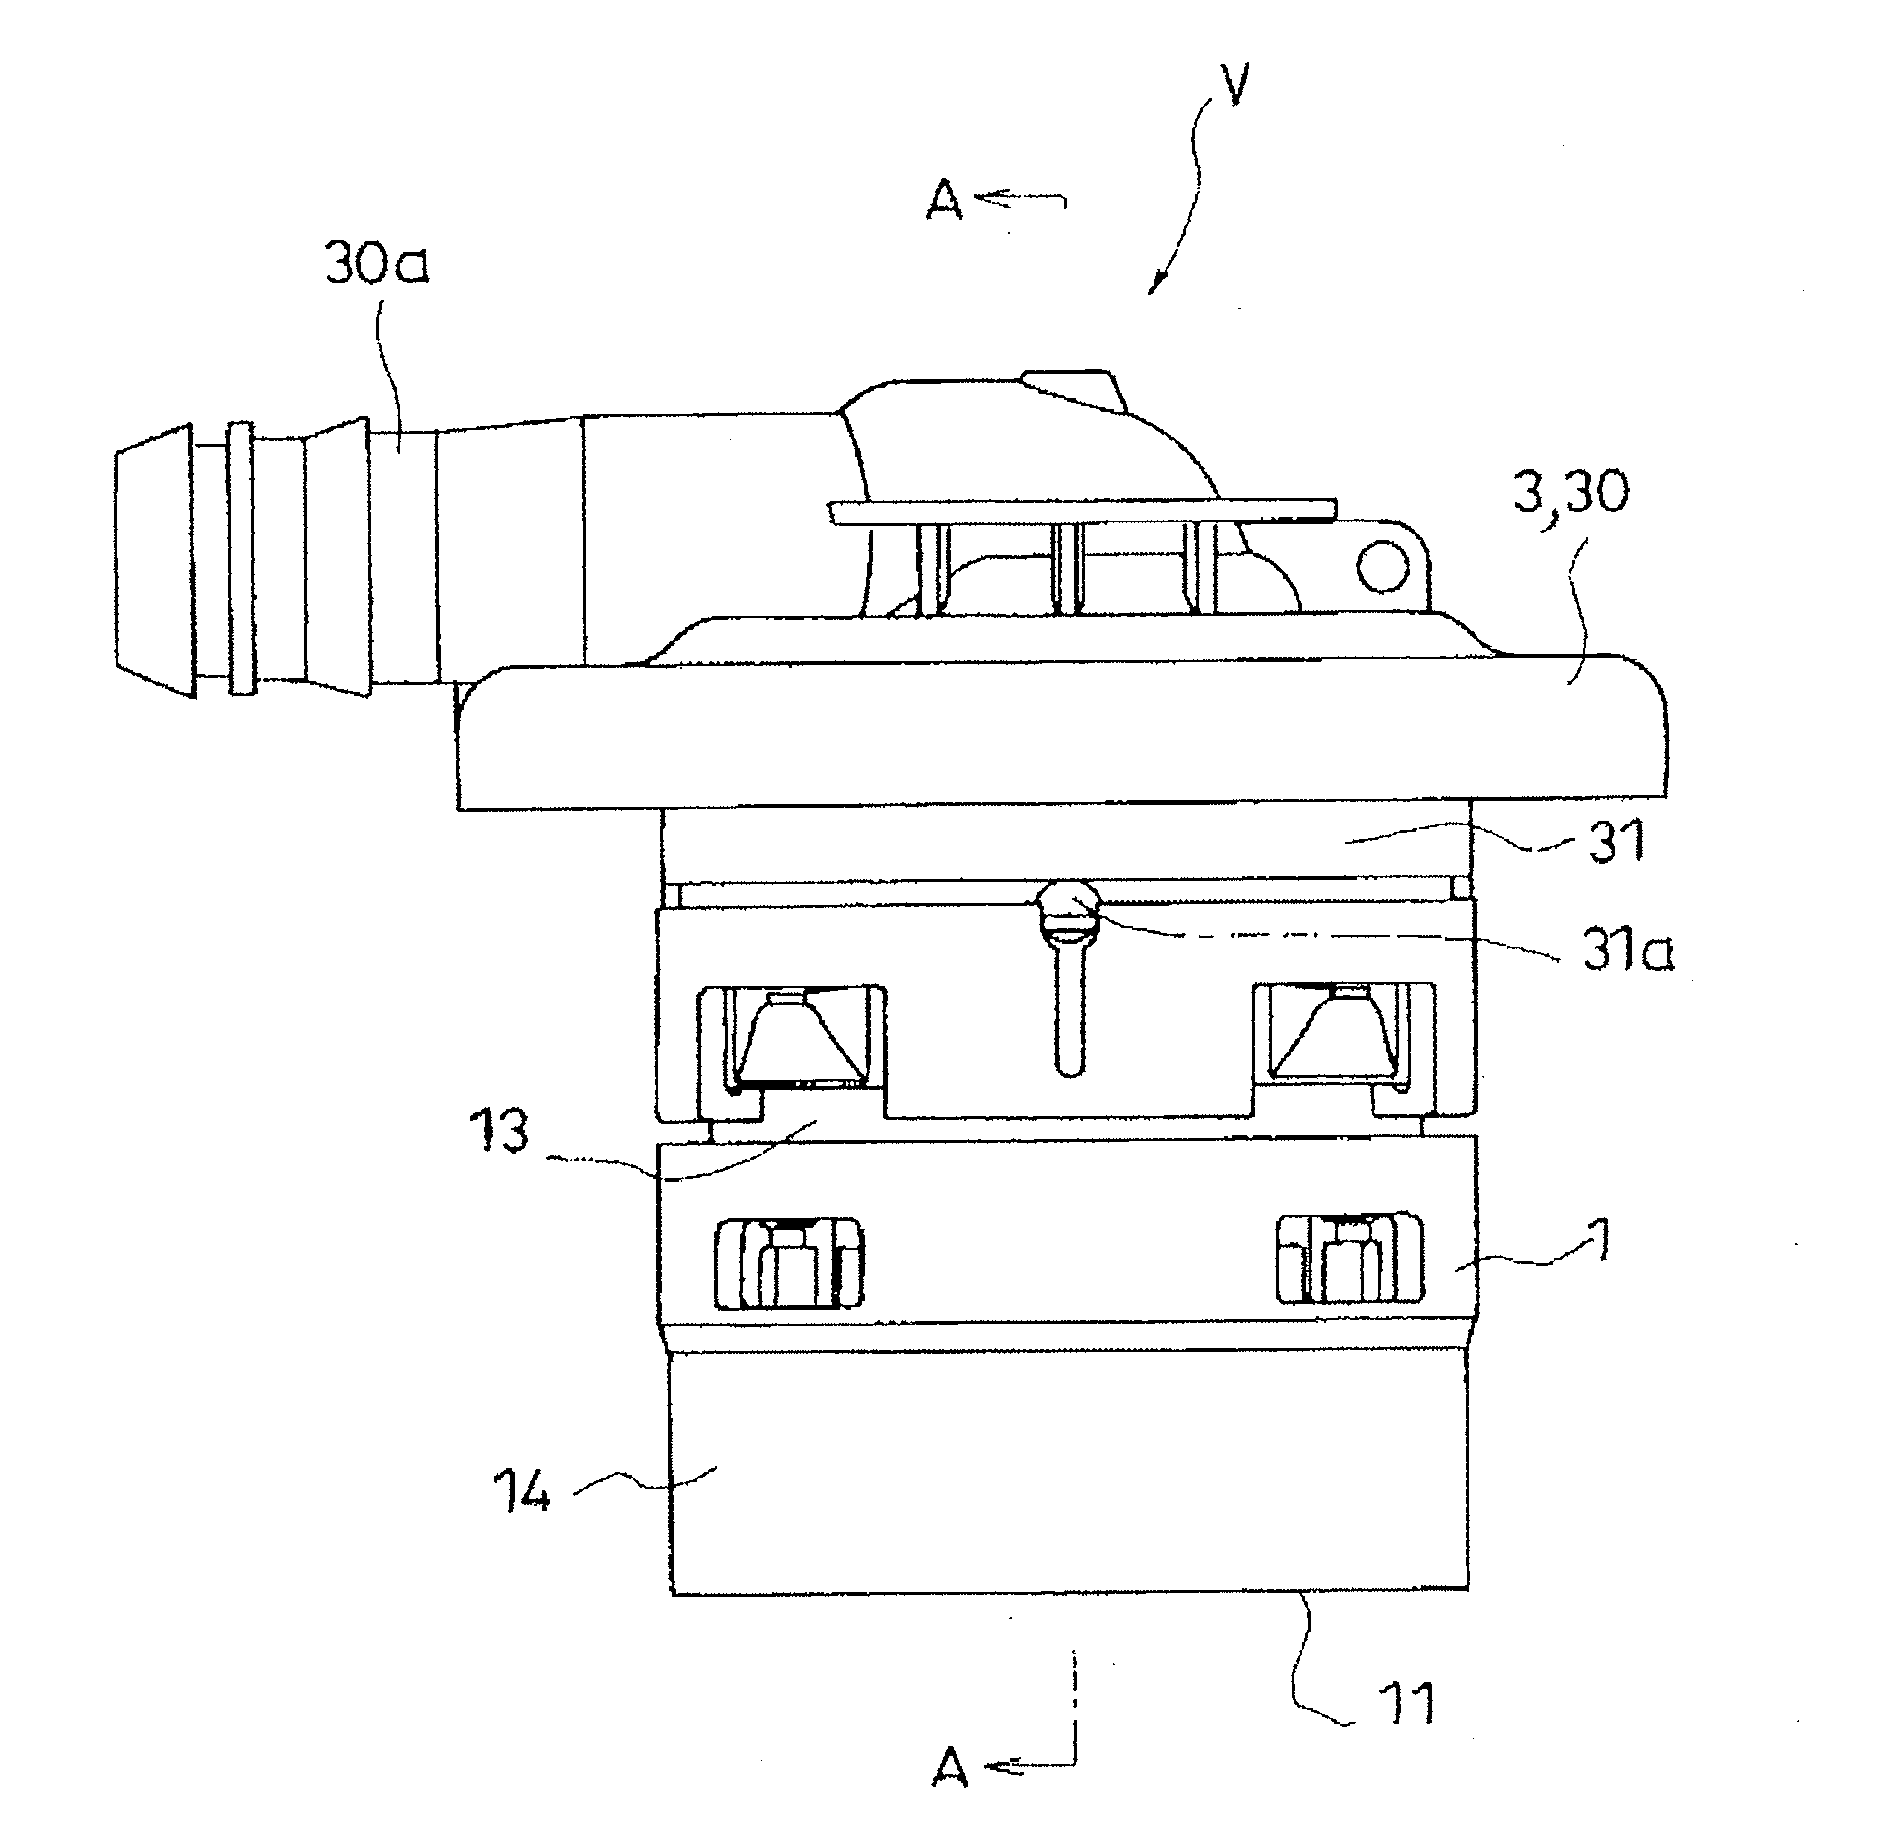 Valve device for fuel tank